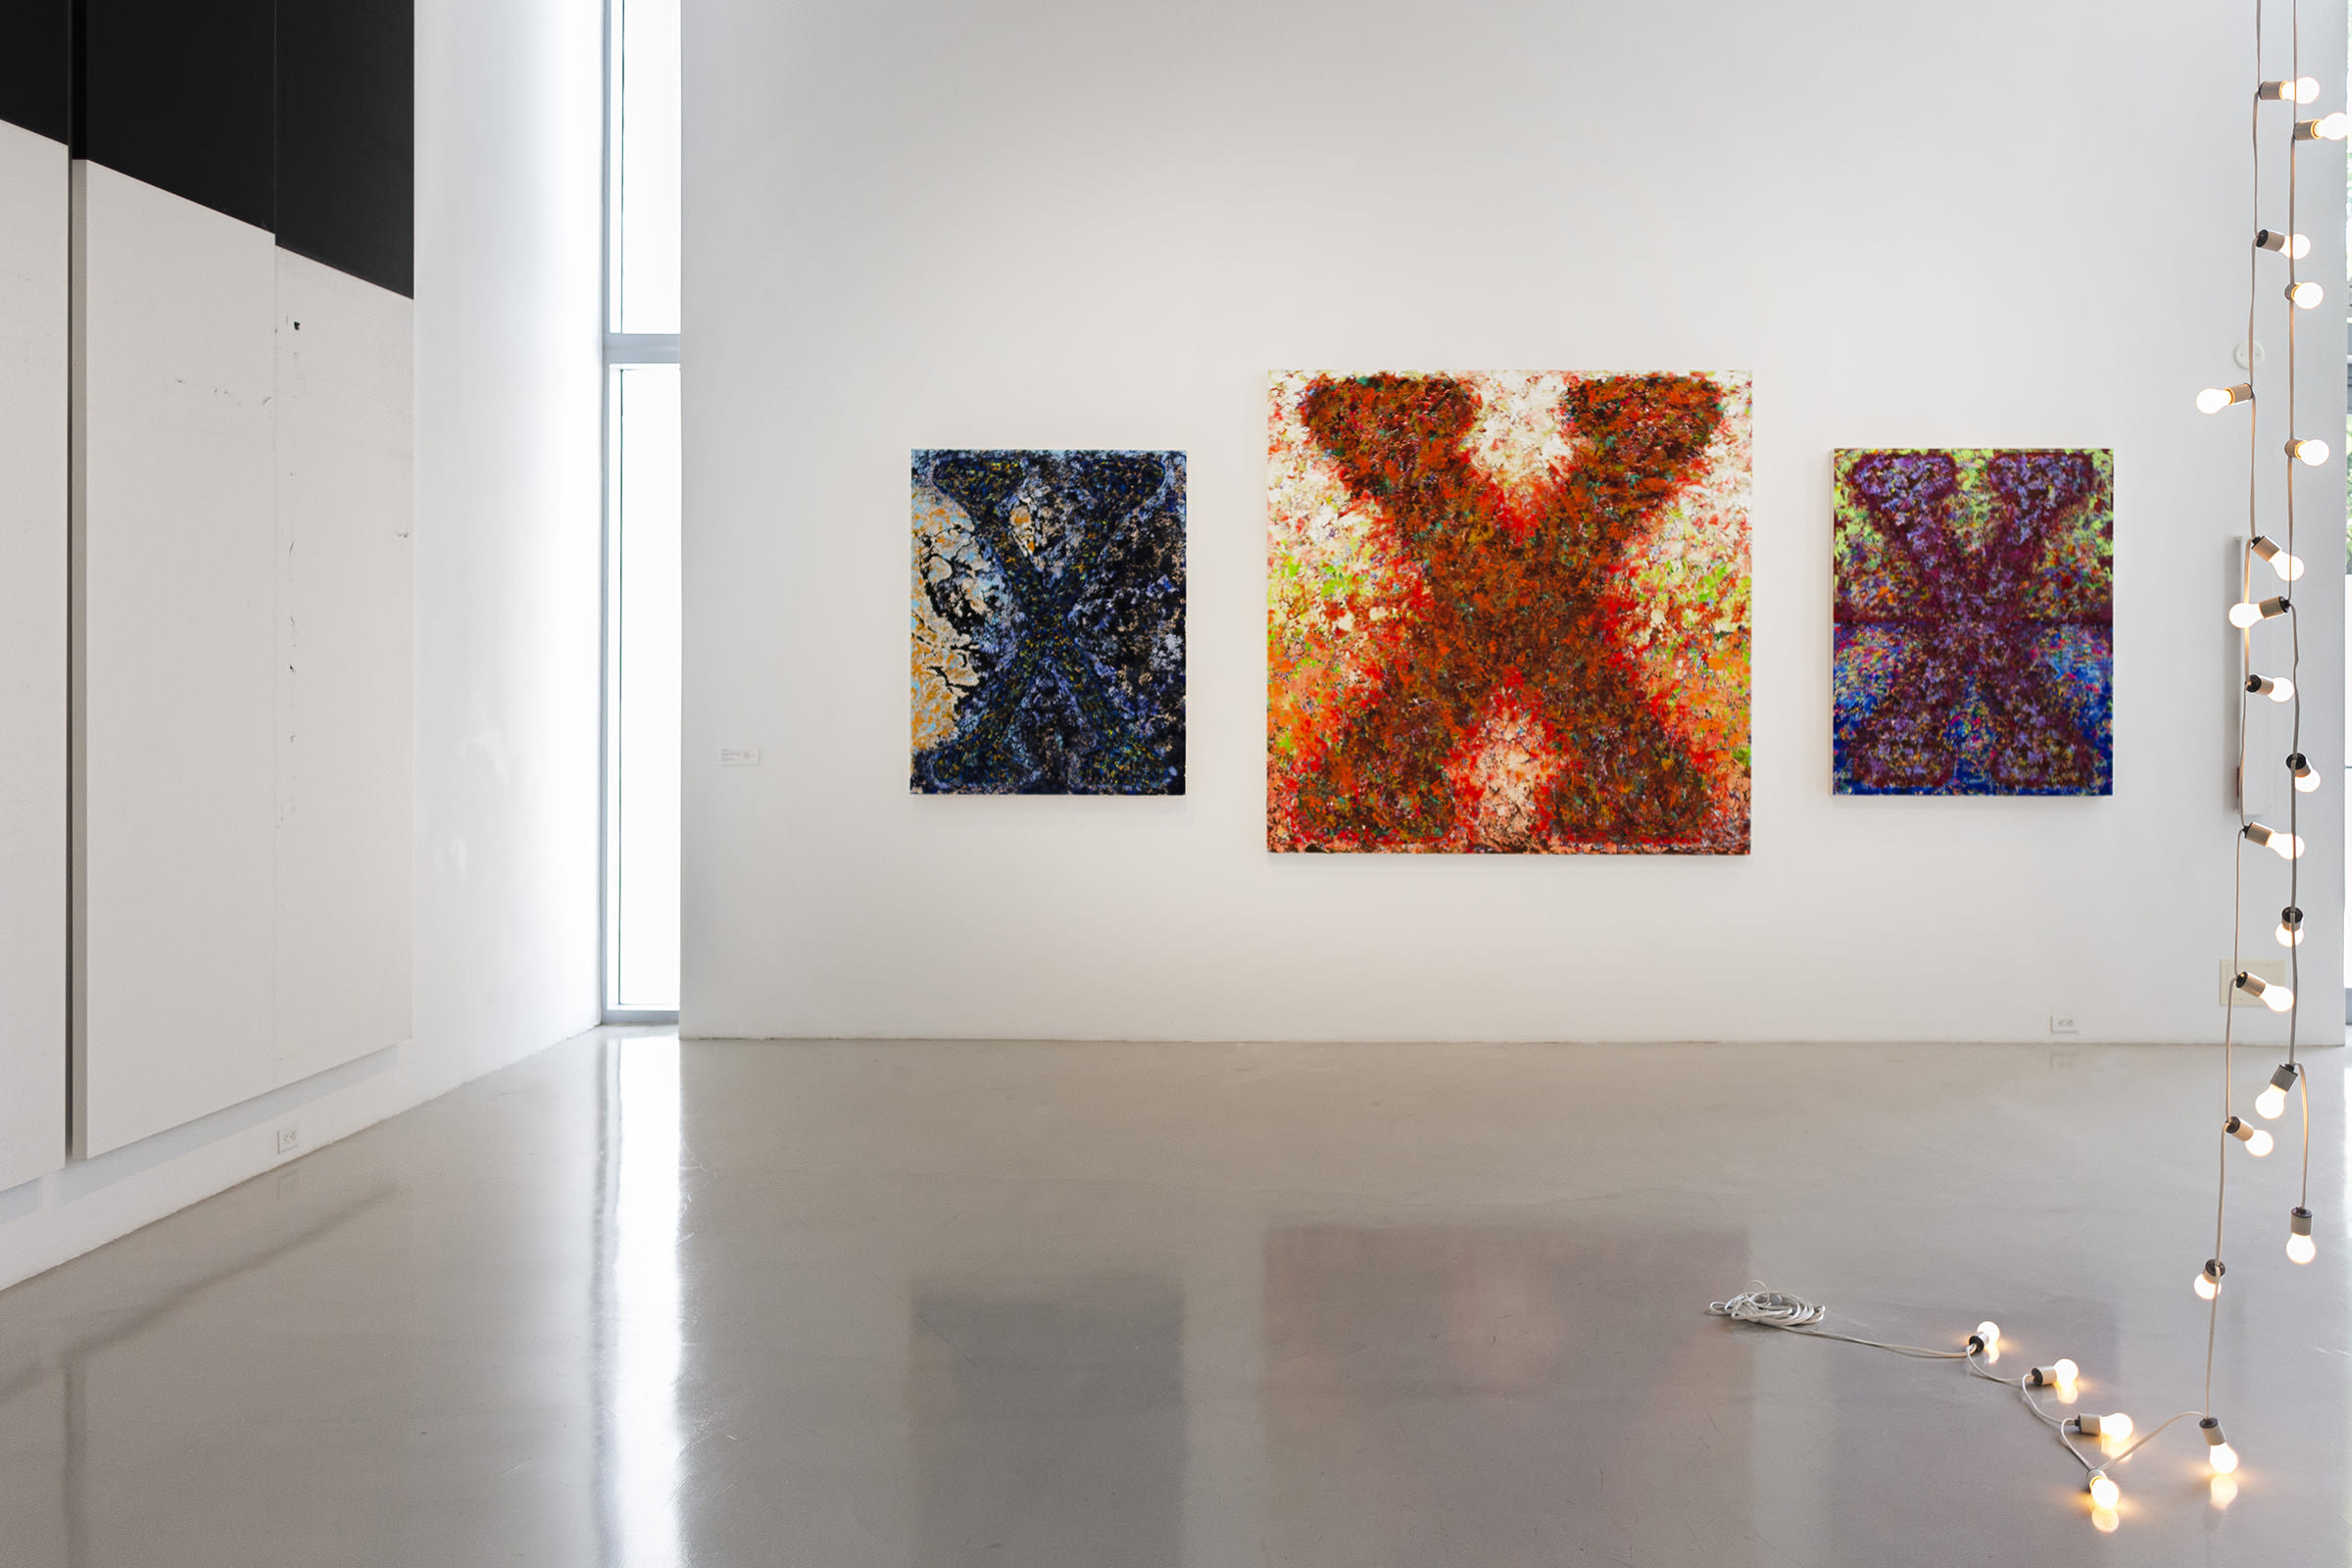 Installation view of 'House in Motion', de la Cruz Collection, 2023–24. Pictured, from left to right: Wade Guyton, Untitled, 2012. Vaughn Spann, Shadow in the Night (Blue Train), 2022; A House on Fire (Marked Man), 2023; and A Love like Dawn, 2022. Felix Gonzalez-Torres, Untitled (America #3), 1992. Courtesy of the de la Cruz Collection.